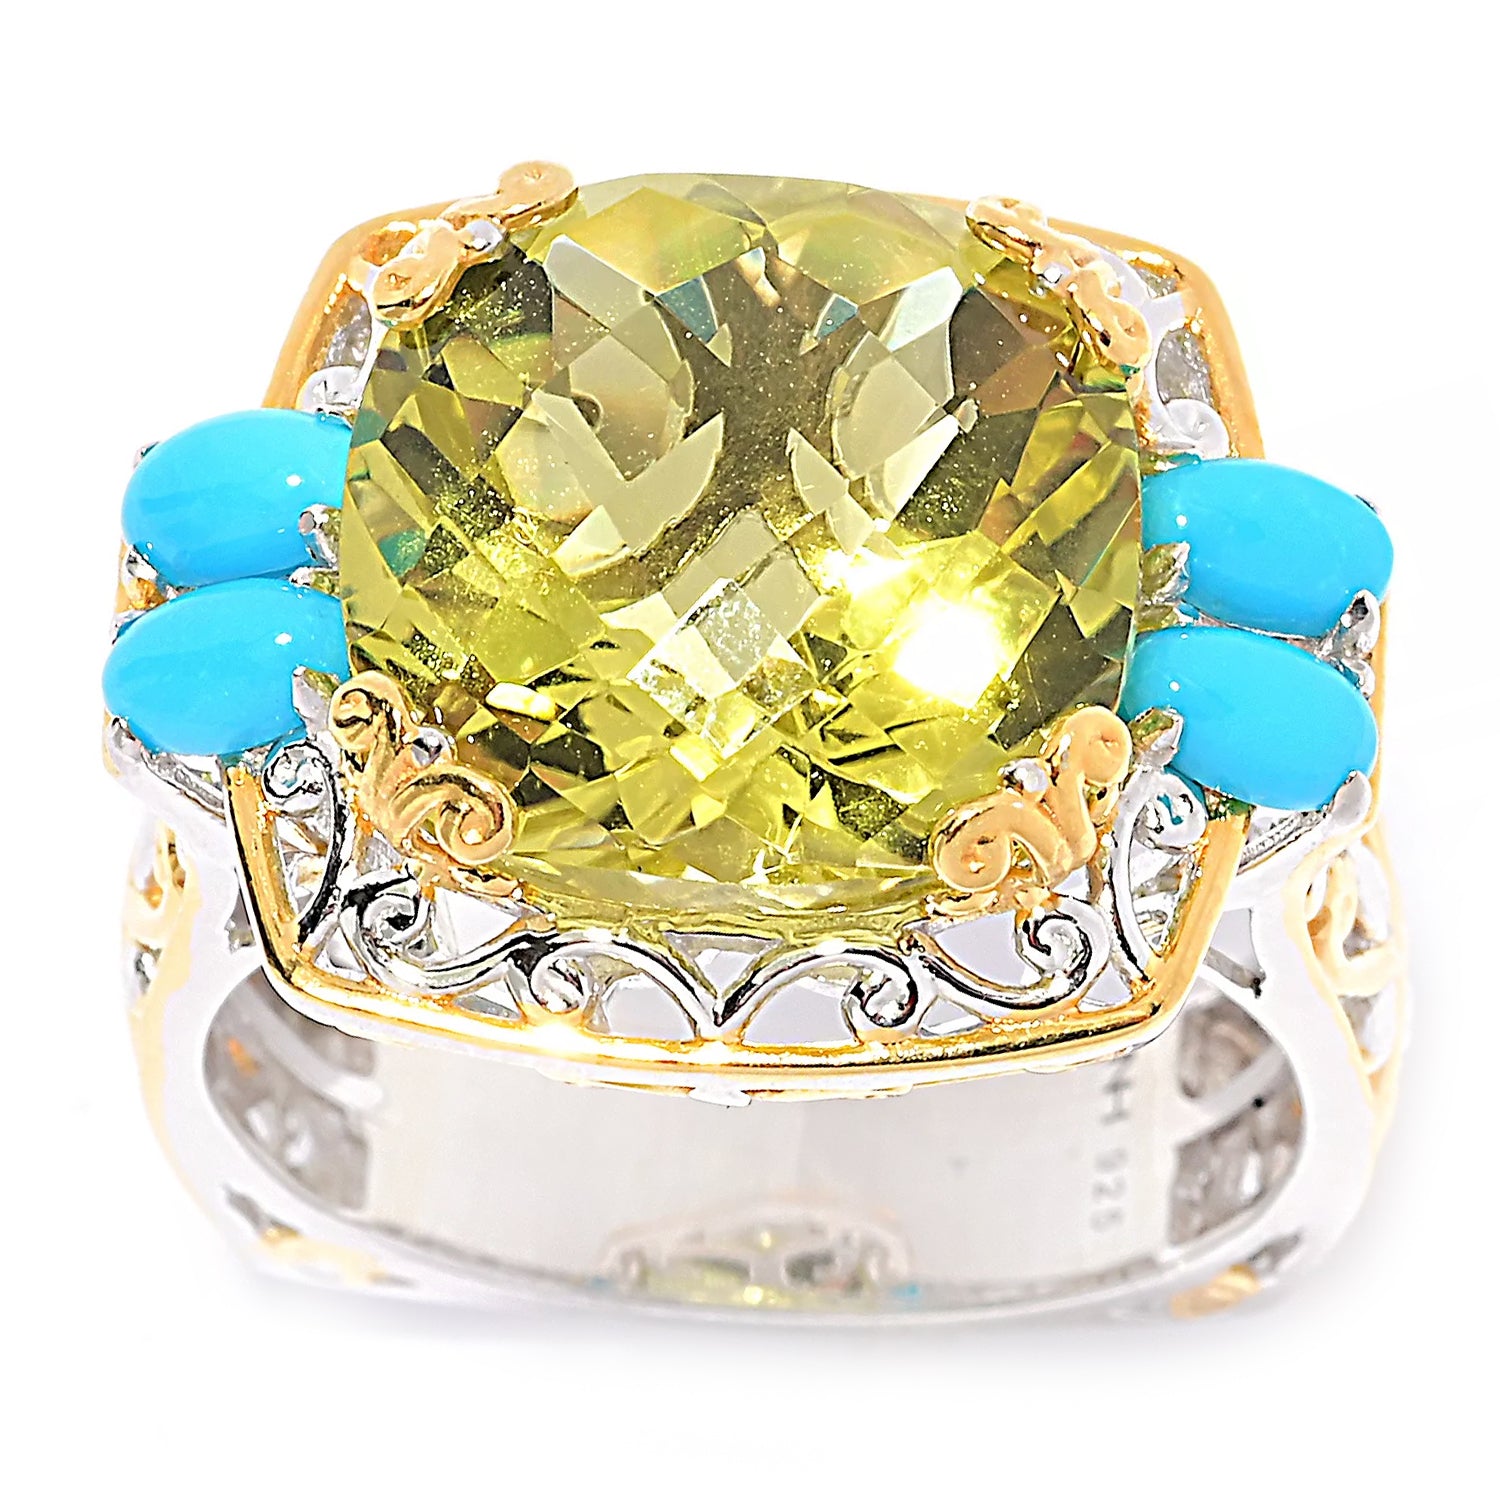 Gems en Vogue 11.37ctw Ouro Verde & Sleeping Beauty Turquoise Ring